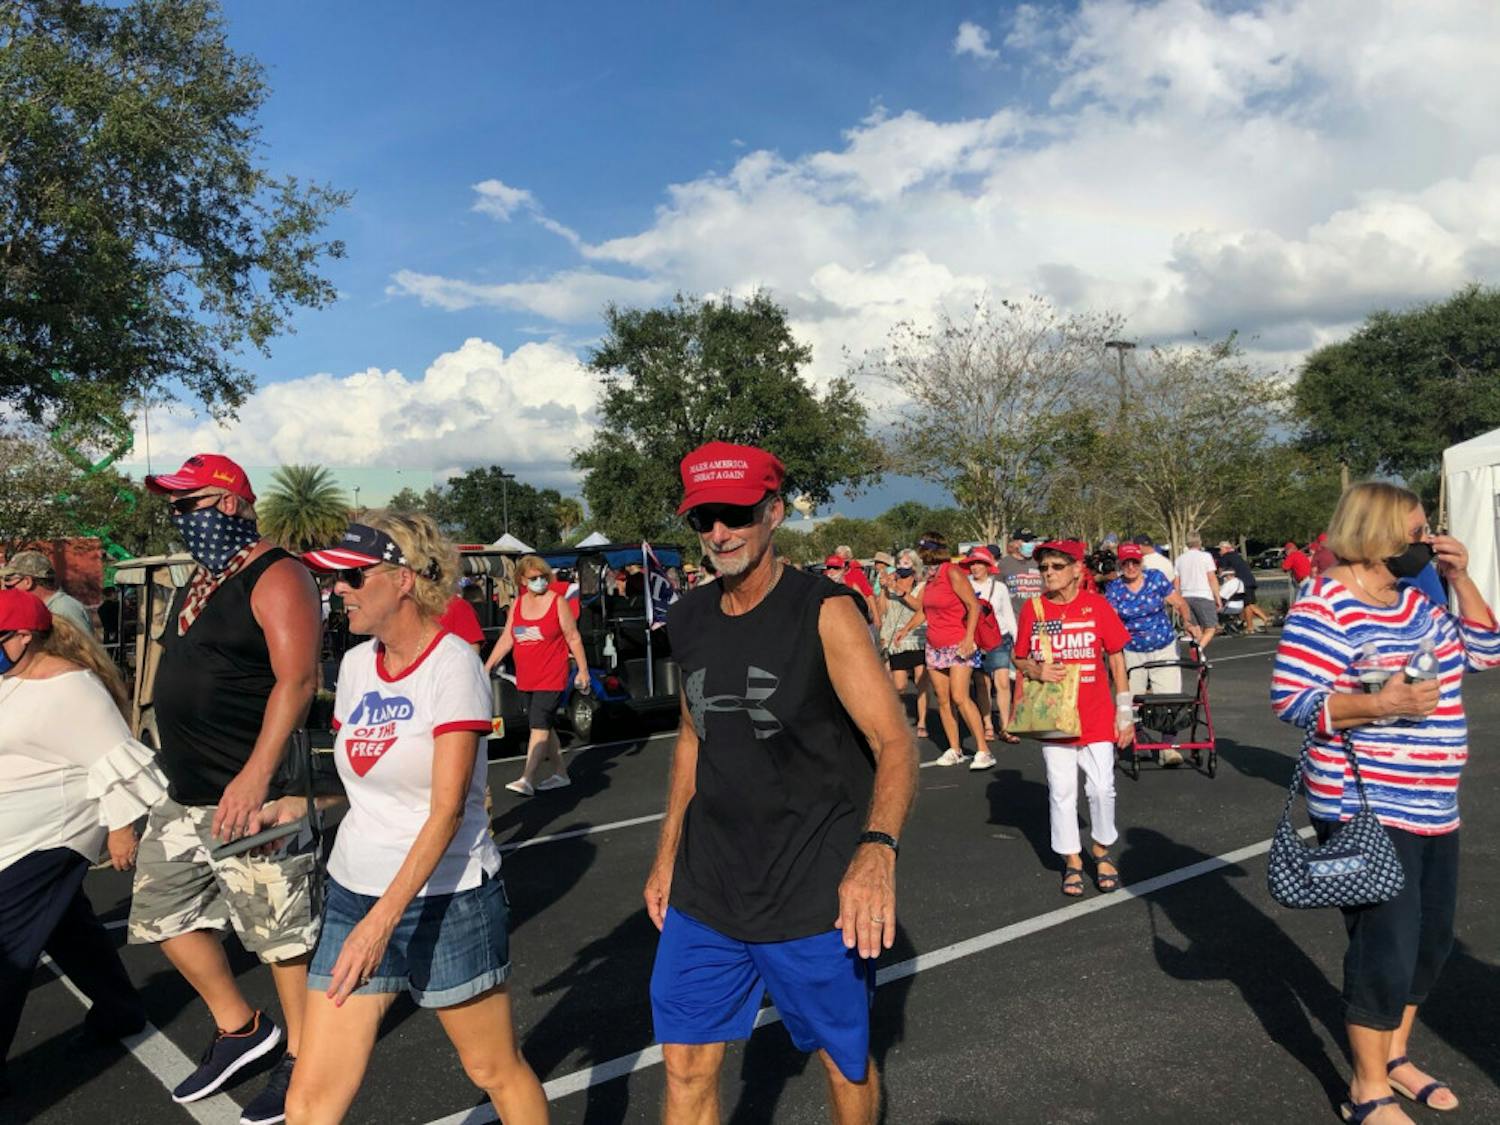 Hundreds of people gathered at The Villages,&nbsp;a massive retirement community west of Orlando, on Saturday to hear Vice President Mike Pence's campaign speech.